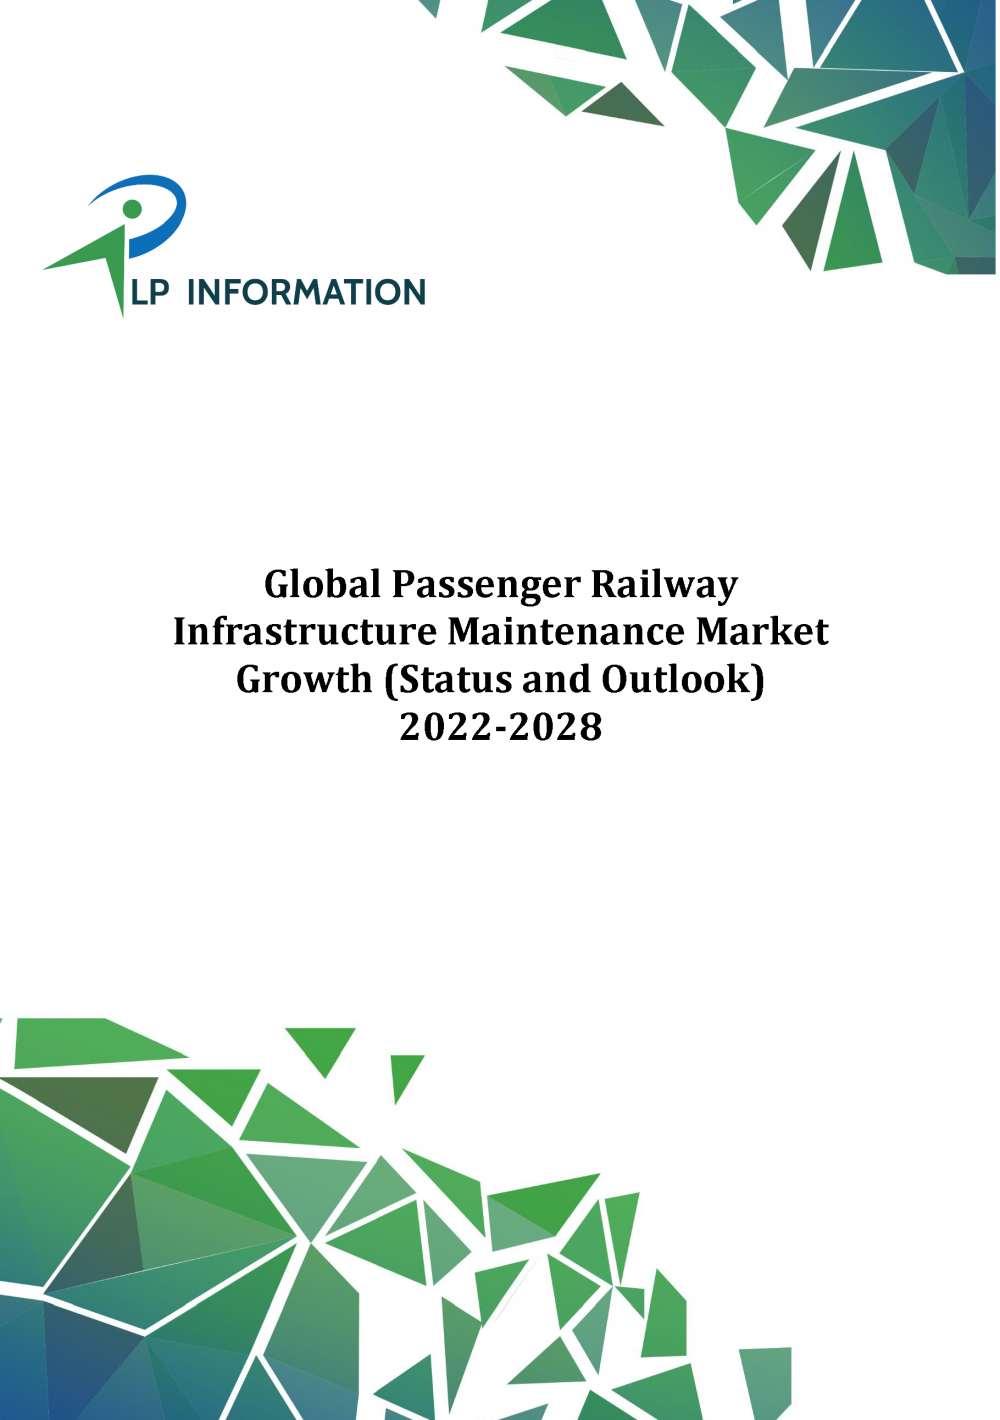 Global Passenger Railway Infrastructure Maintenance Market Growth (Status and Outlook) 2022-2028_cover